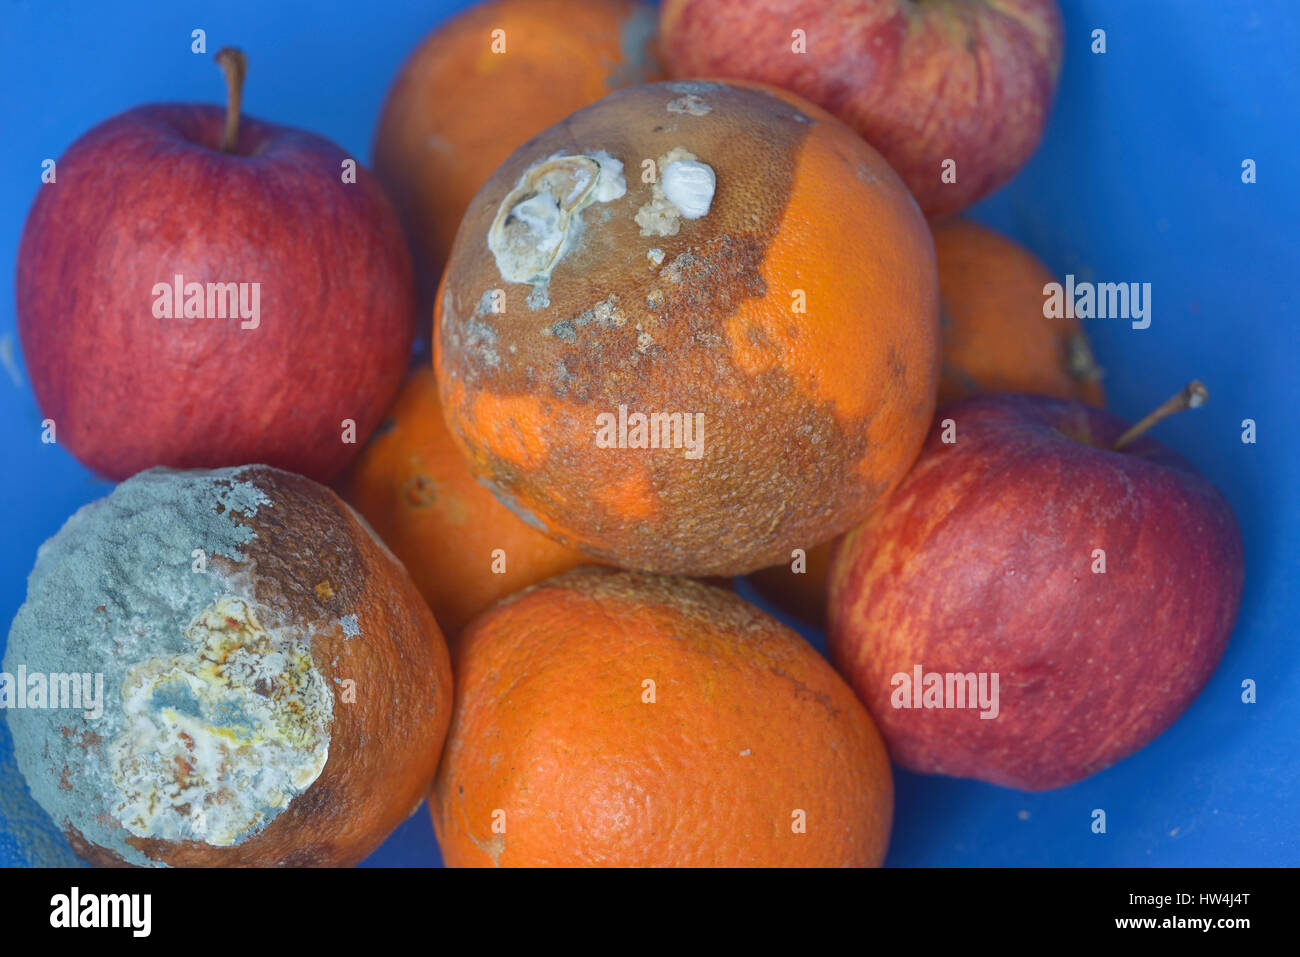 Rotten oranges and apples in a fruit bowl Stock Photo